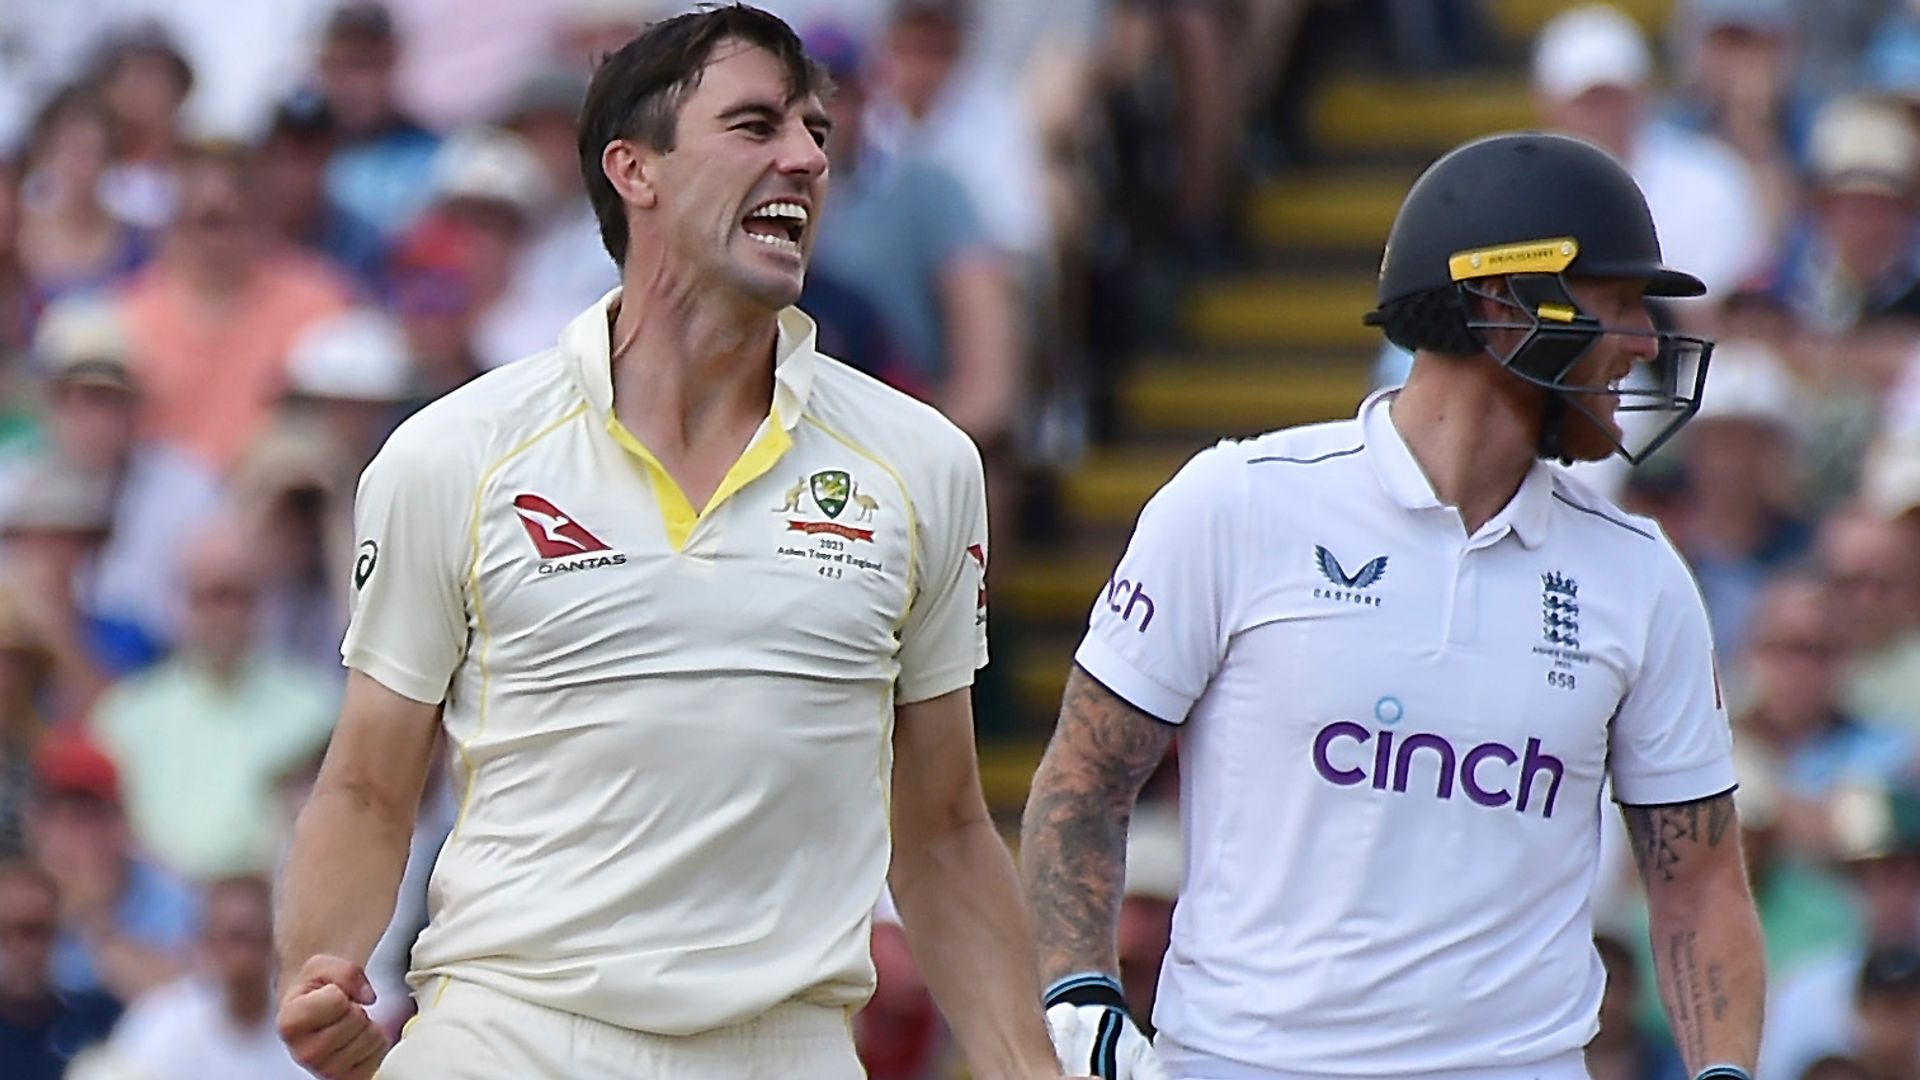 Sky Sports breaks viewing figure records in first Ashes Test